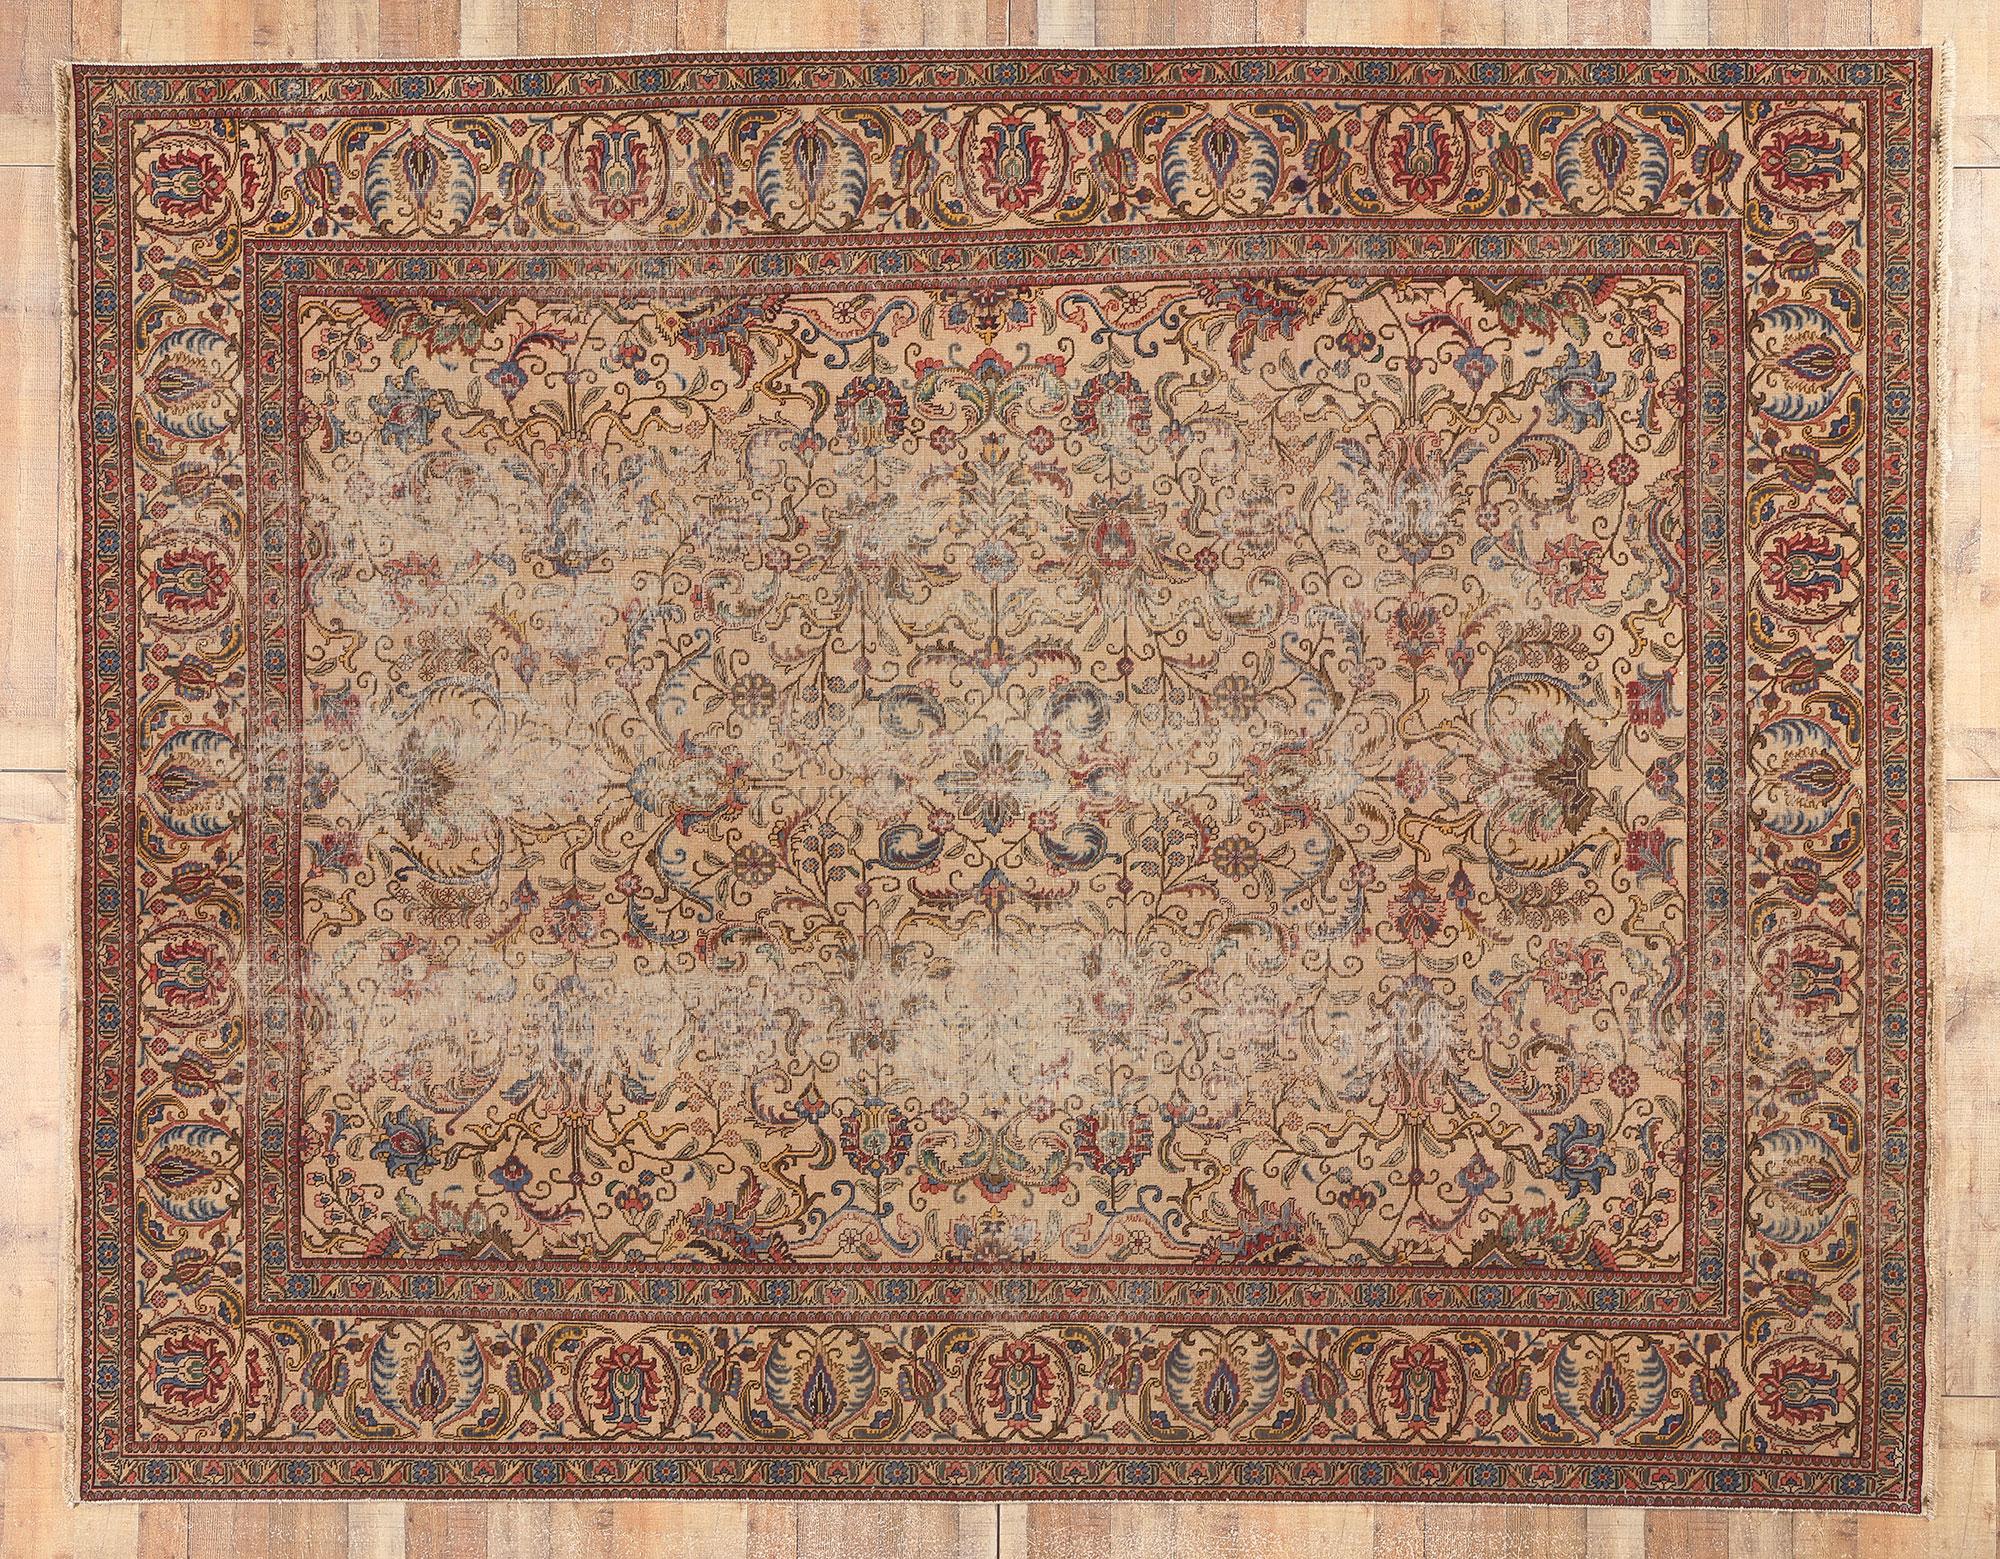 Wool Antique-Worn Persian Tabriz Rug, Weathered Beauty Meets Rustic Sensibility For Sale